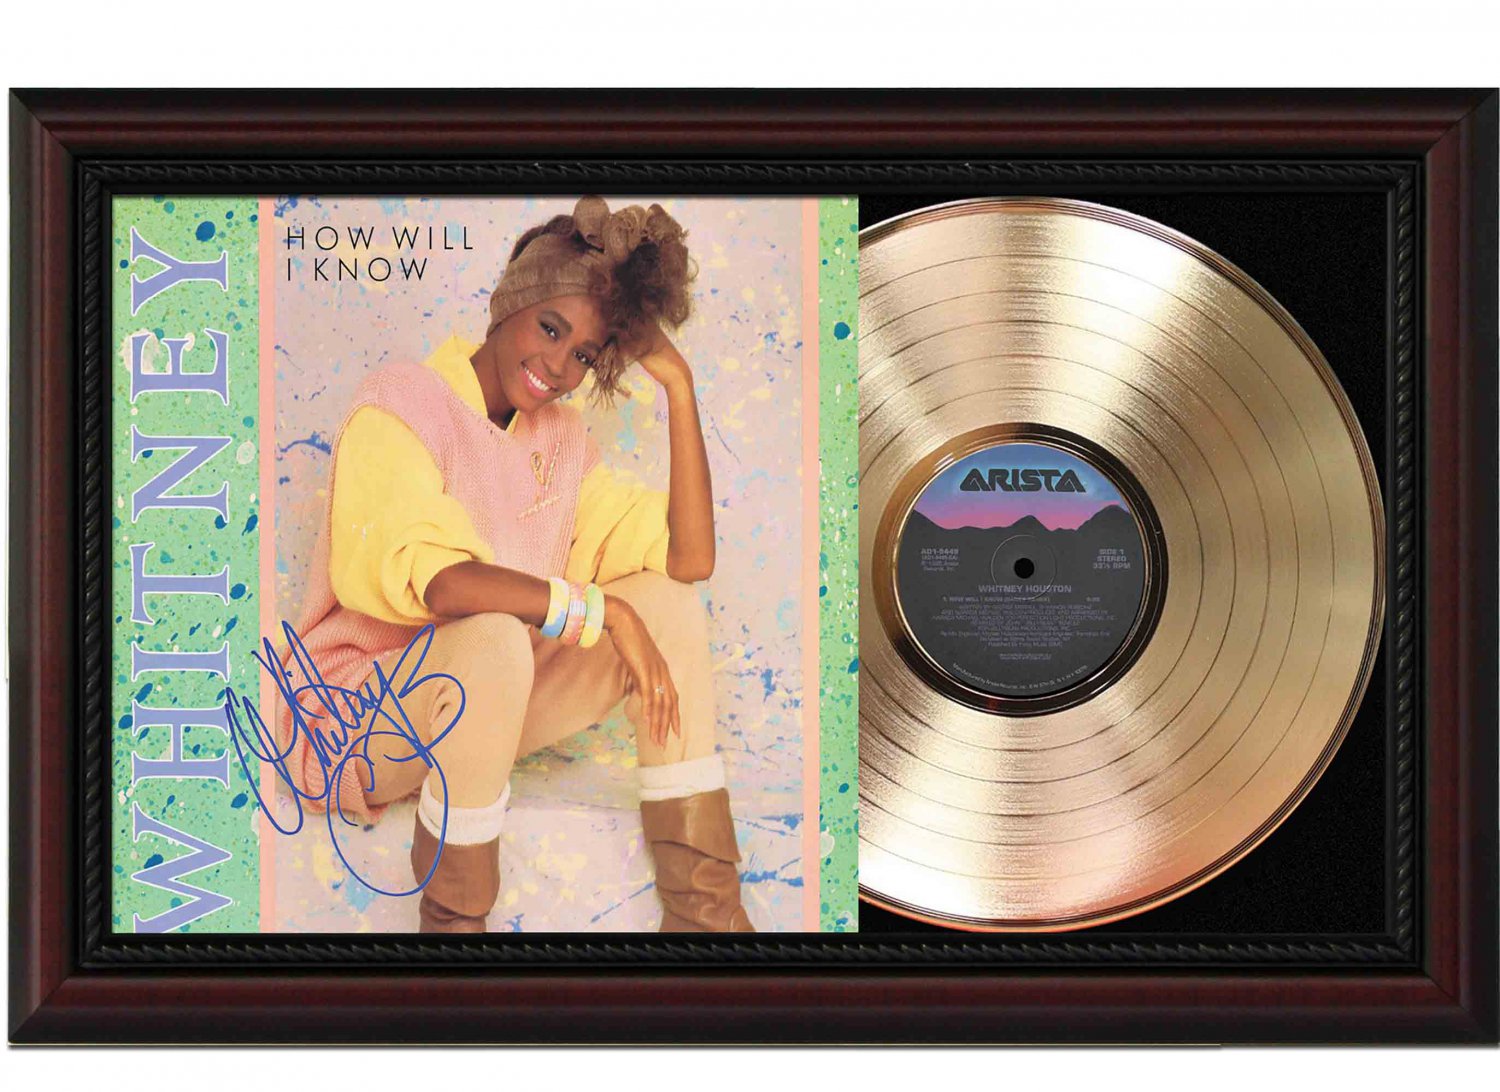 WHITNEY HOUSTON "How Will I Know" Framed Record Display.